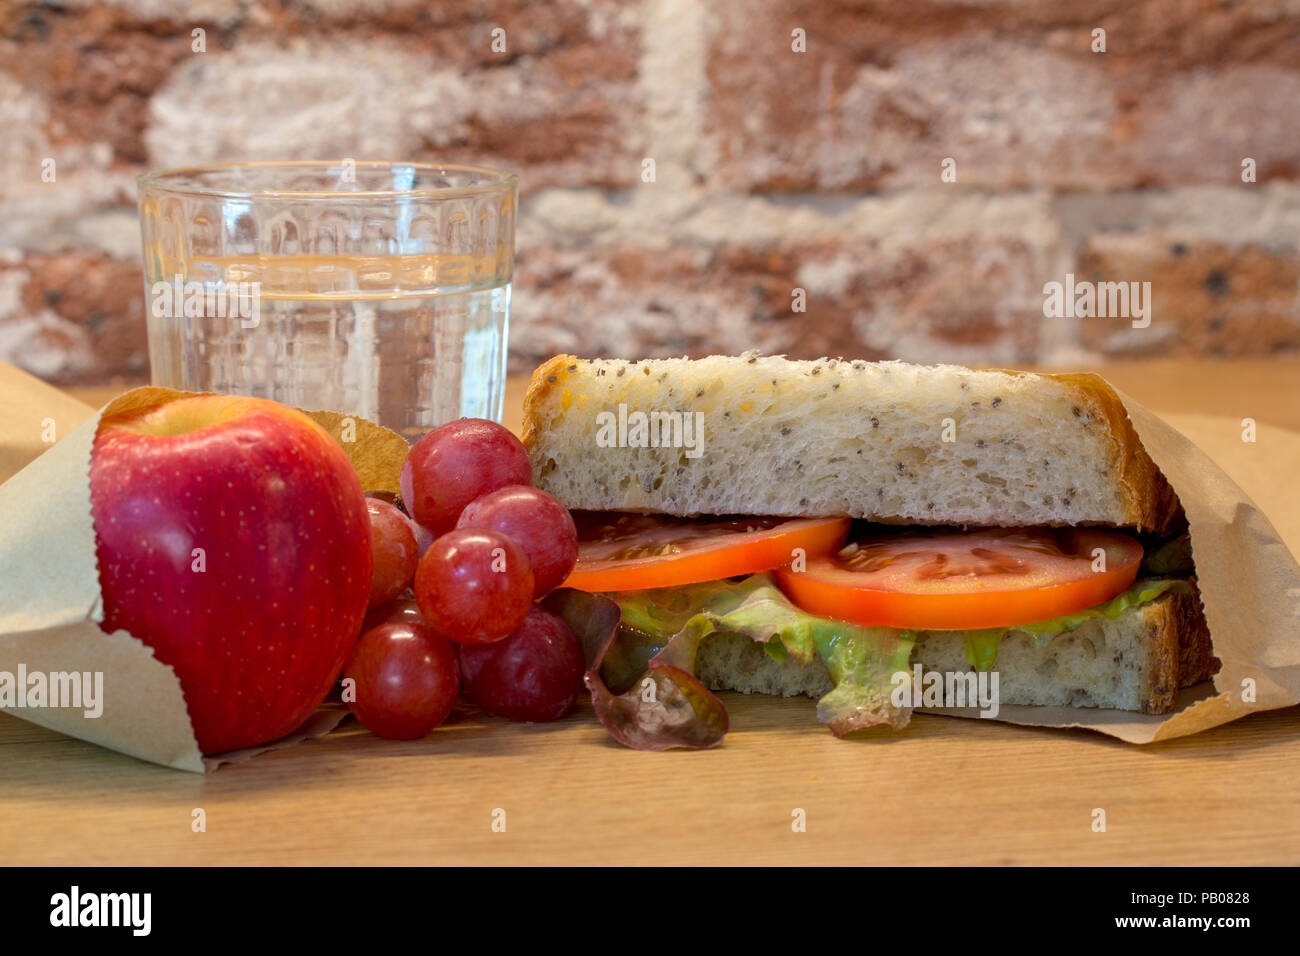 Plastic free healthy lunch using authentic real homemade food. Tomato sandwich, grapes, apple and glass of water. Stock Photo